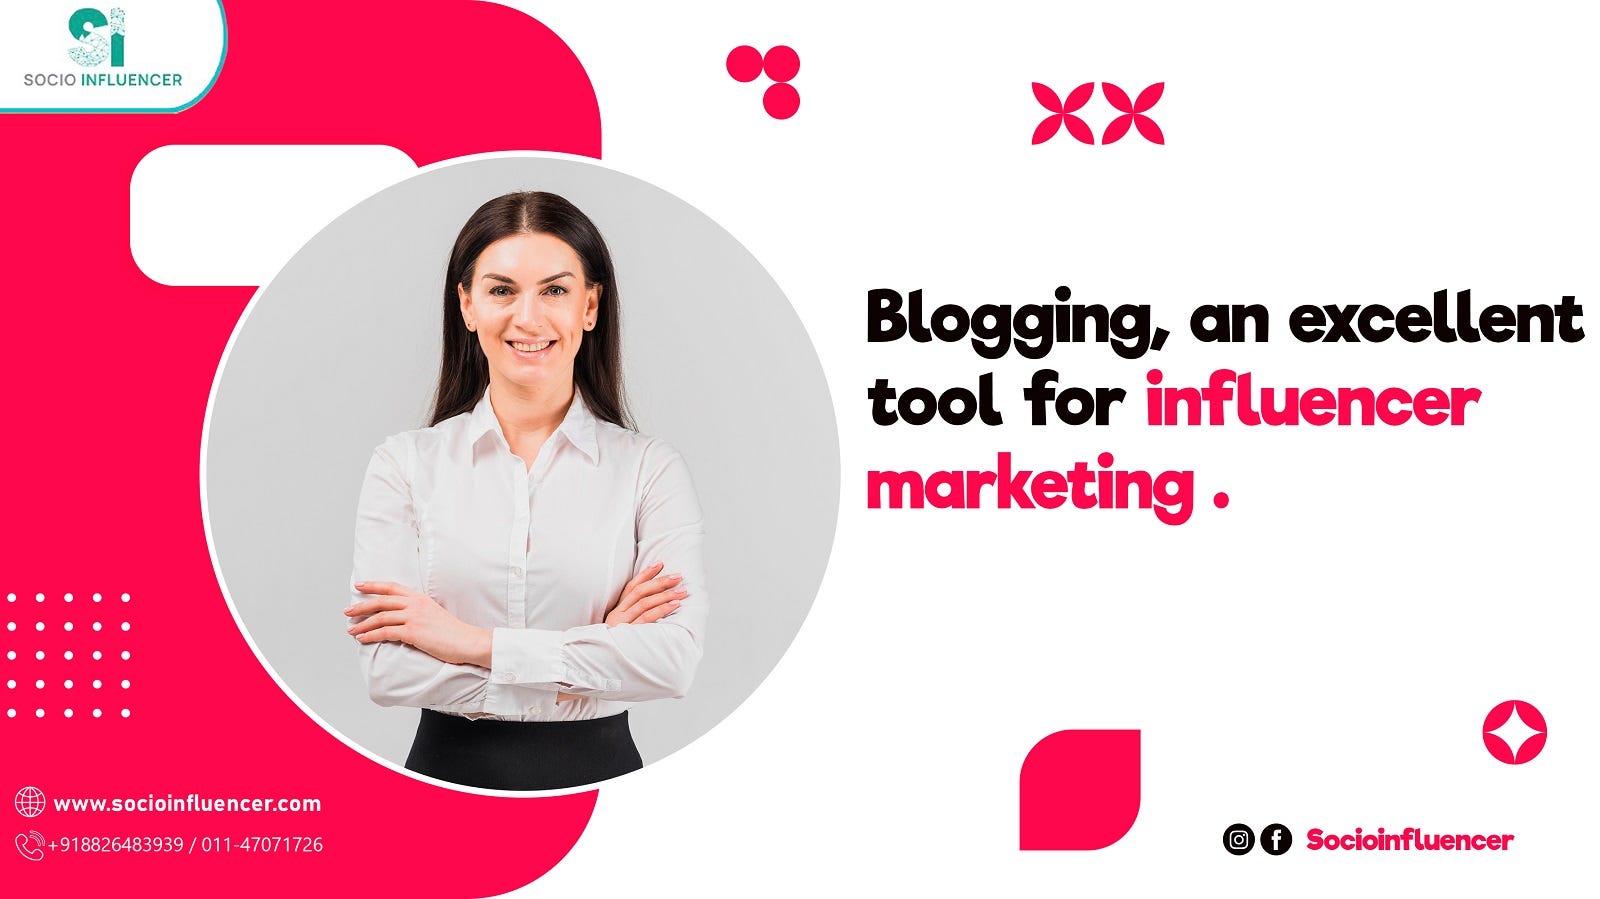 The Power of Blogging as an Influencer Marketing Tool